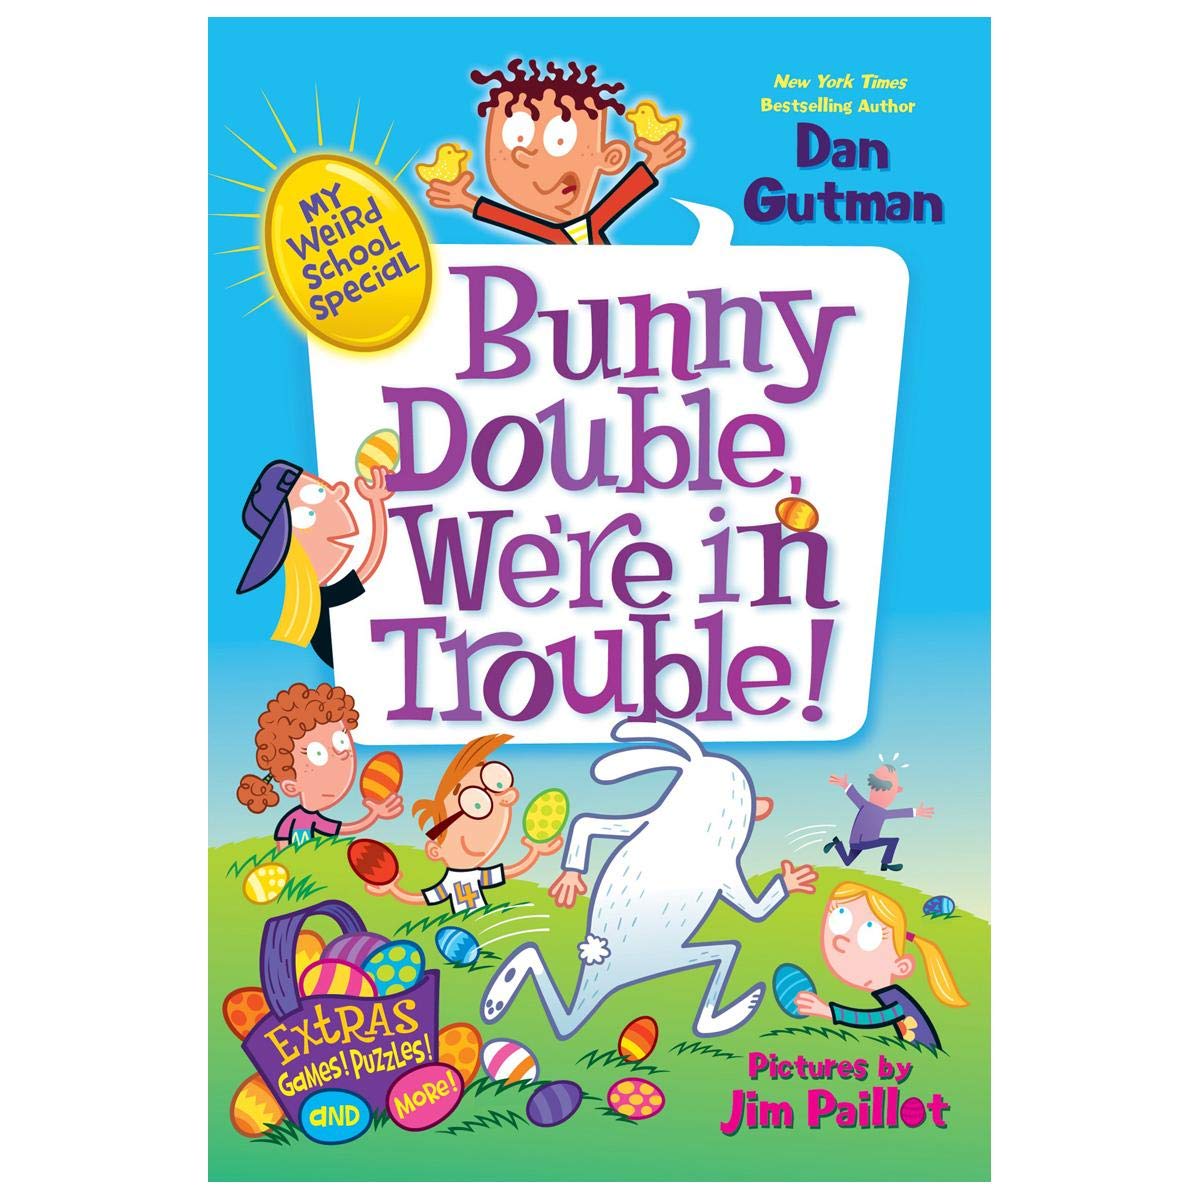 Bunny Double, We are in Trouble!